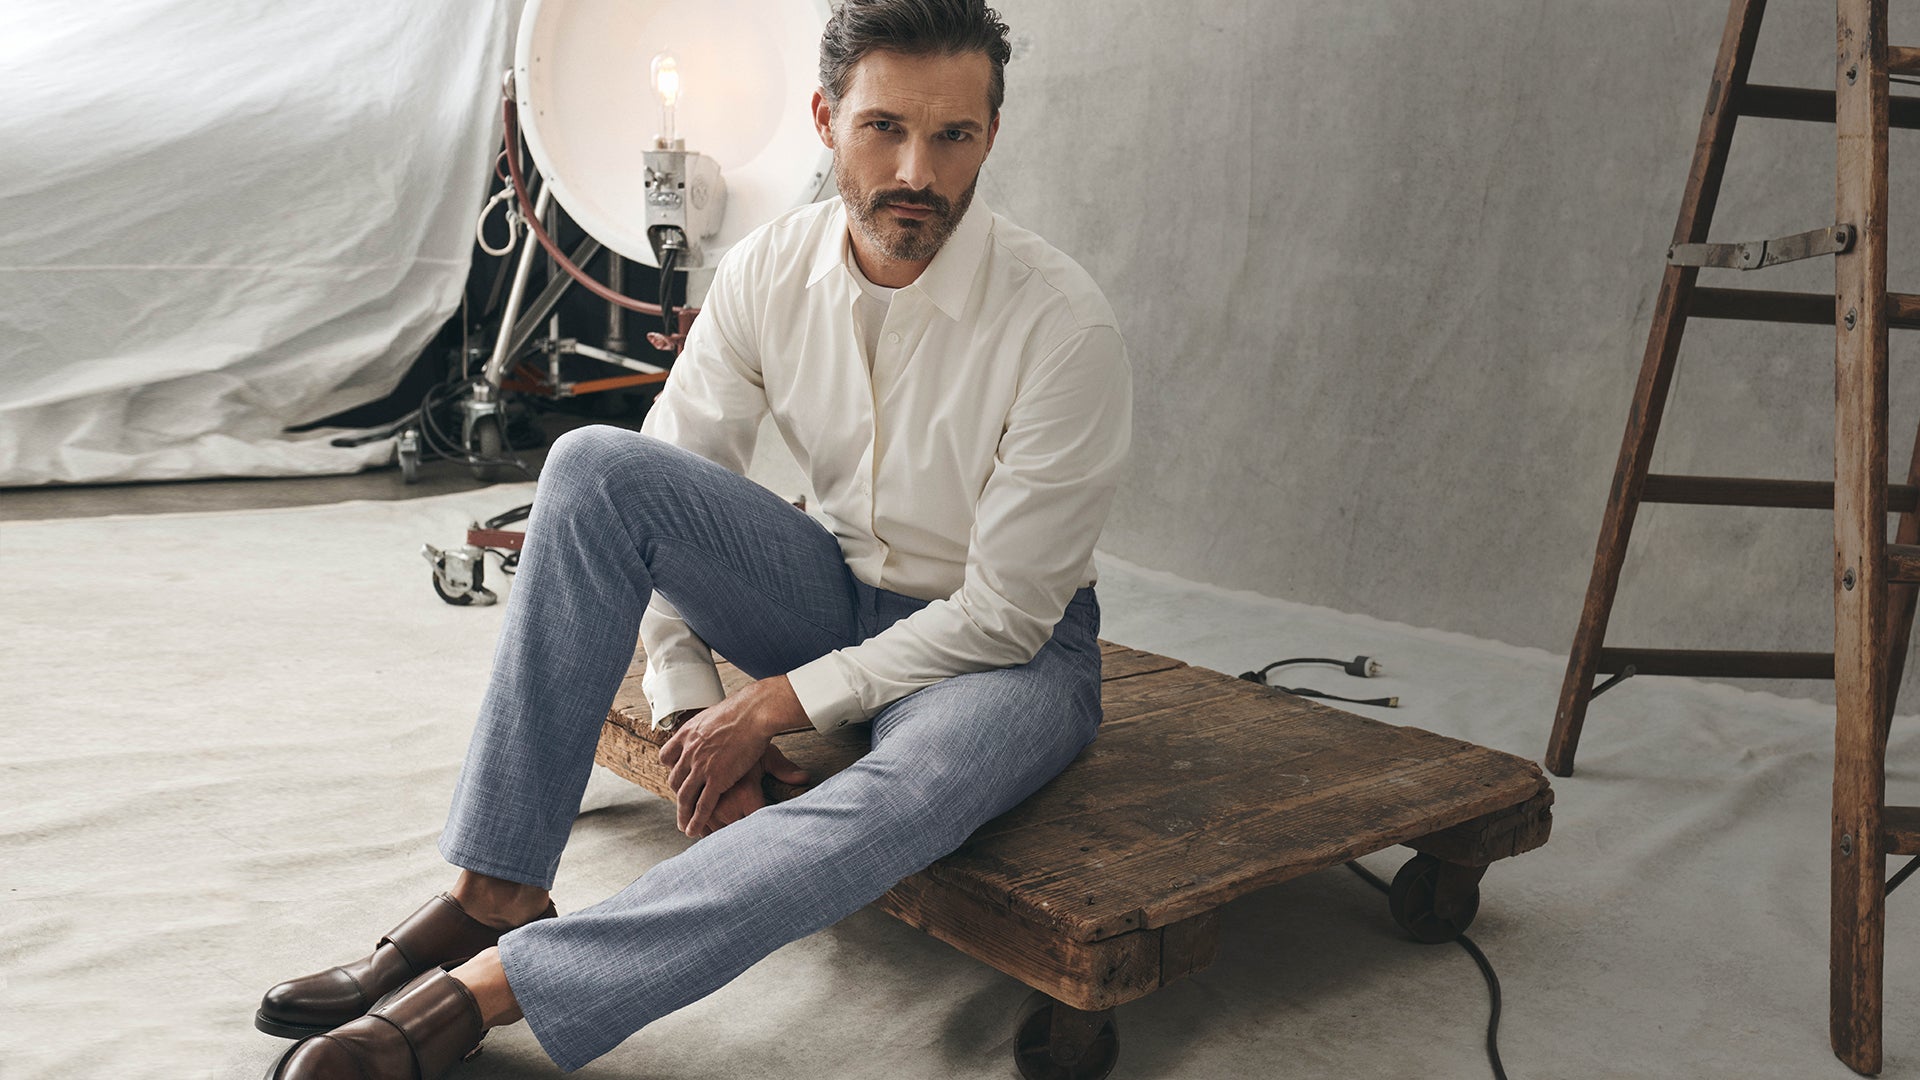 Charisma Fit Explained: Why They're the Best Men's High Rise Jeans – 34  Heritage